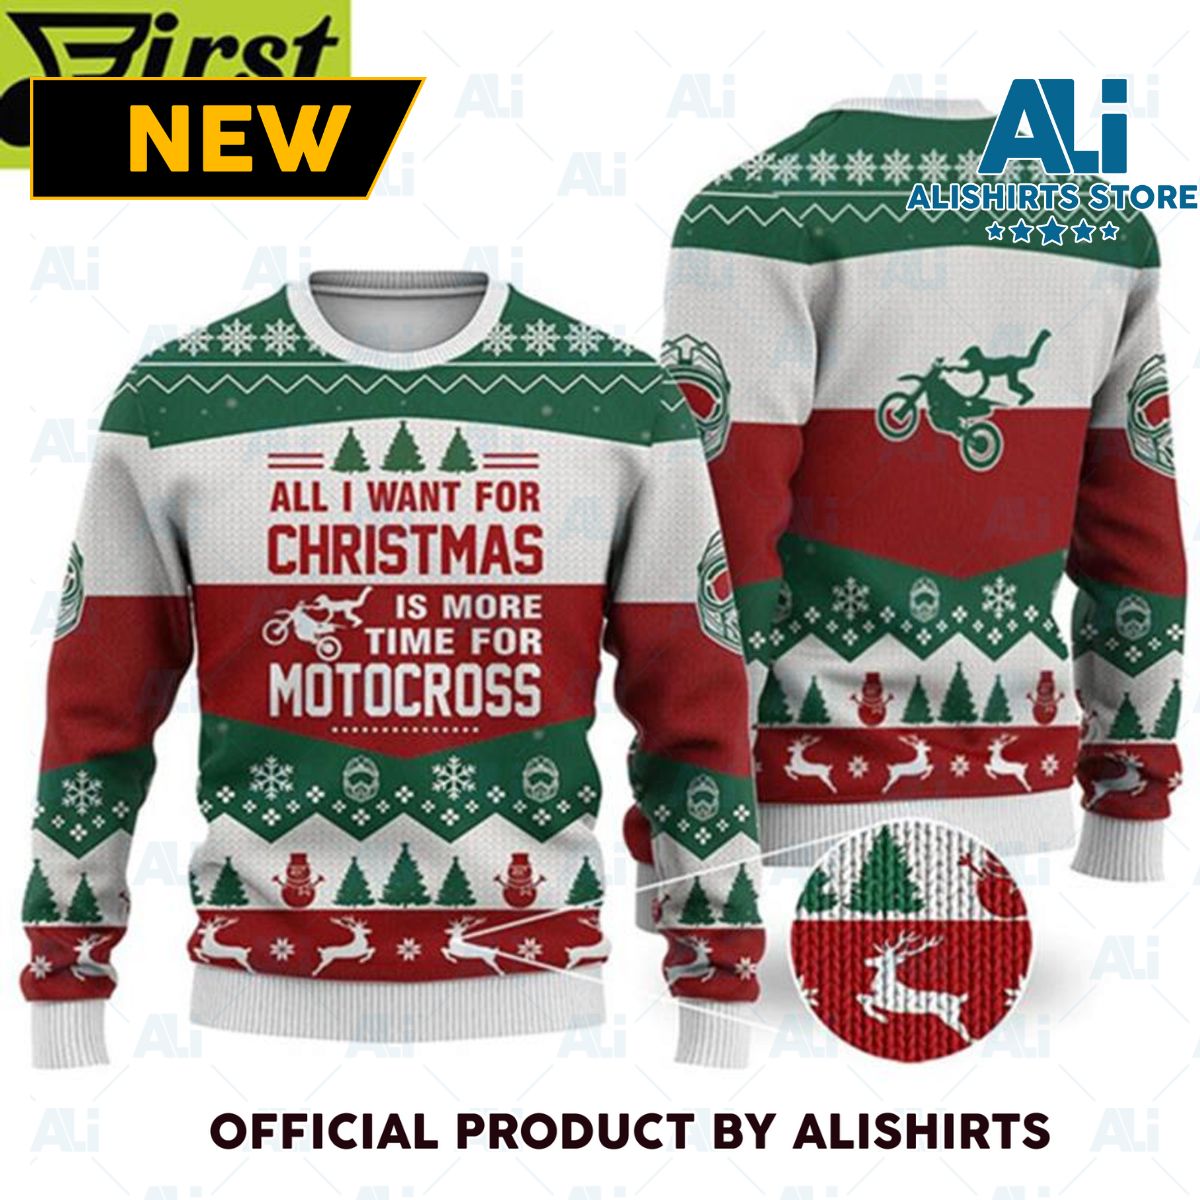 All I Want For Christmas Is Motocross 3D Ugliest Christmas Sweater Ever Gifts For Christmas - EC41